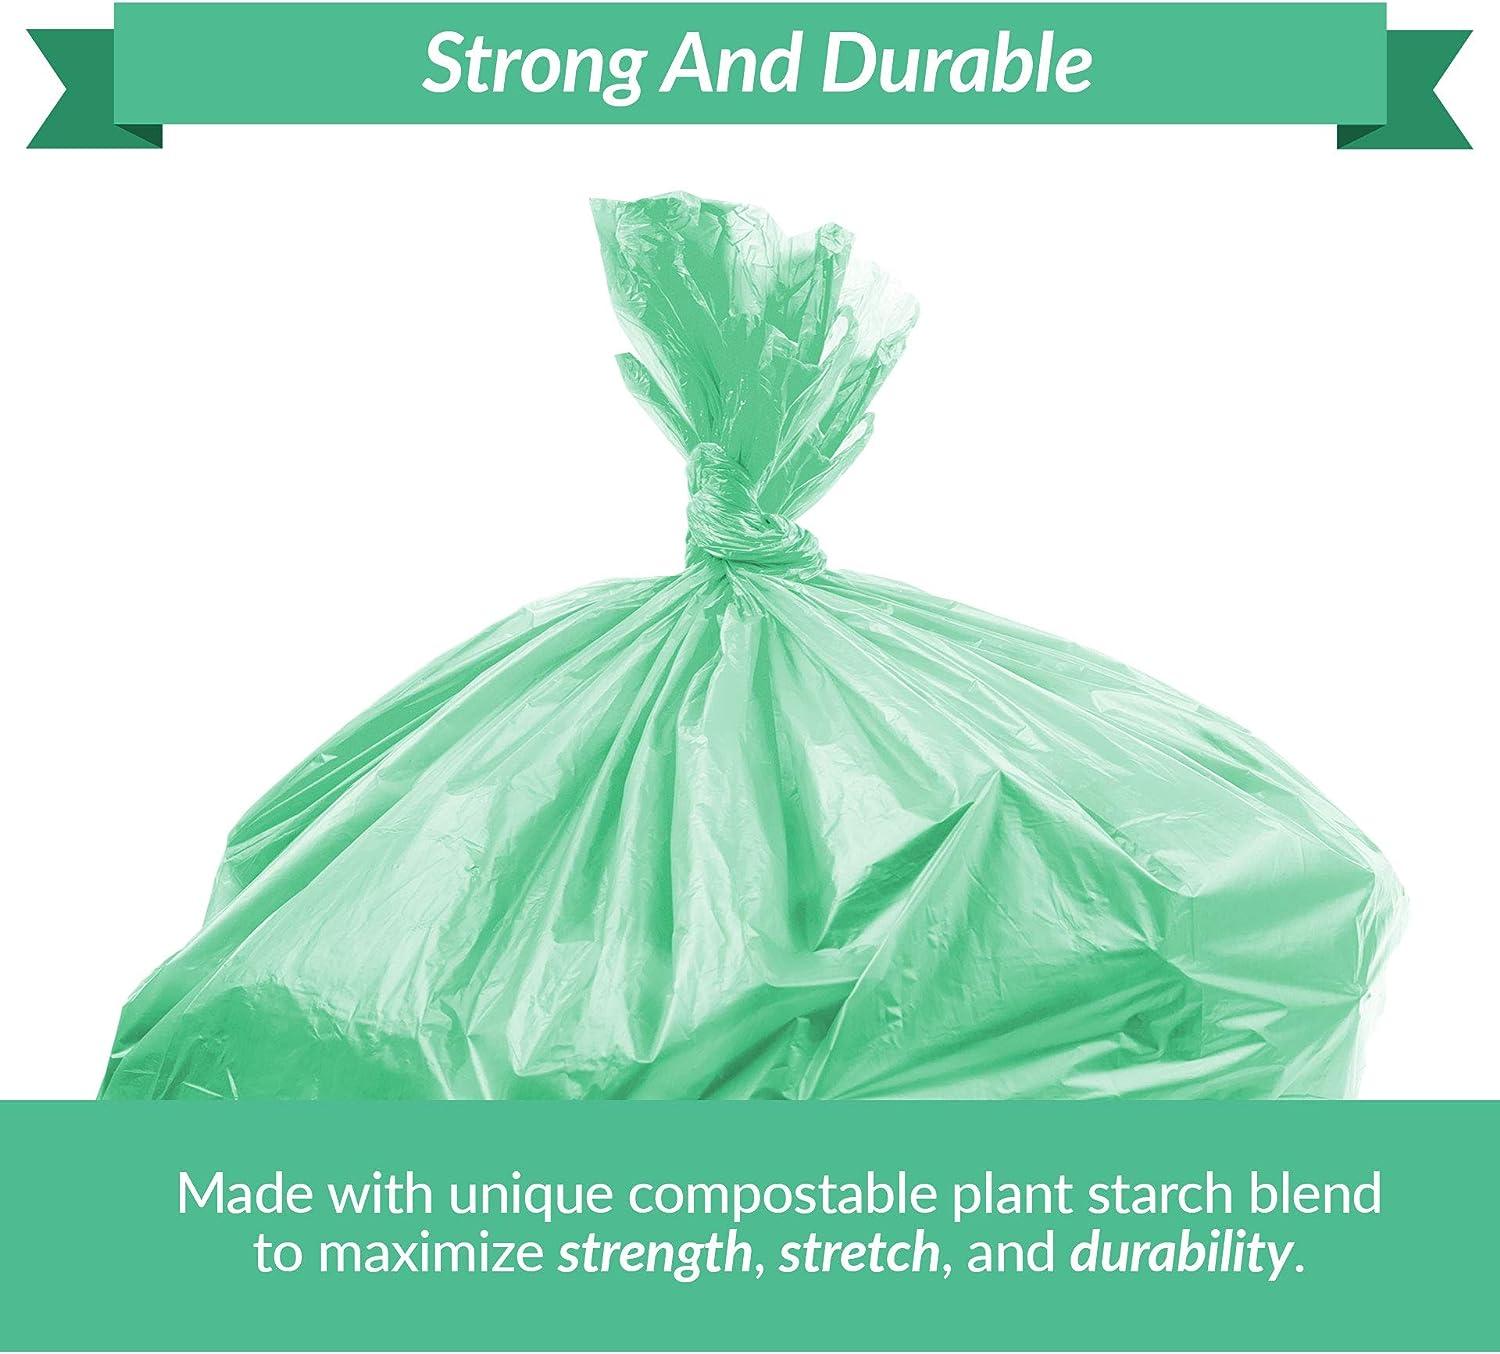 Reli. Biodegradable 13 Gallon Trash Bags | 800 Count Bulk | ASTM D6954 |  Green | Eco-Friendly | Oxobiodegradable Under Certain Conditions (See  Product